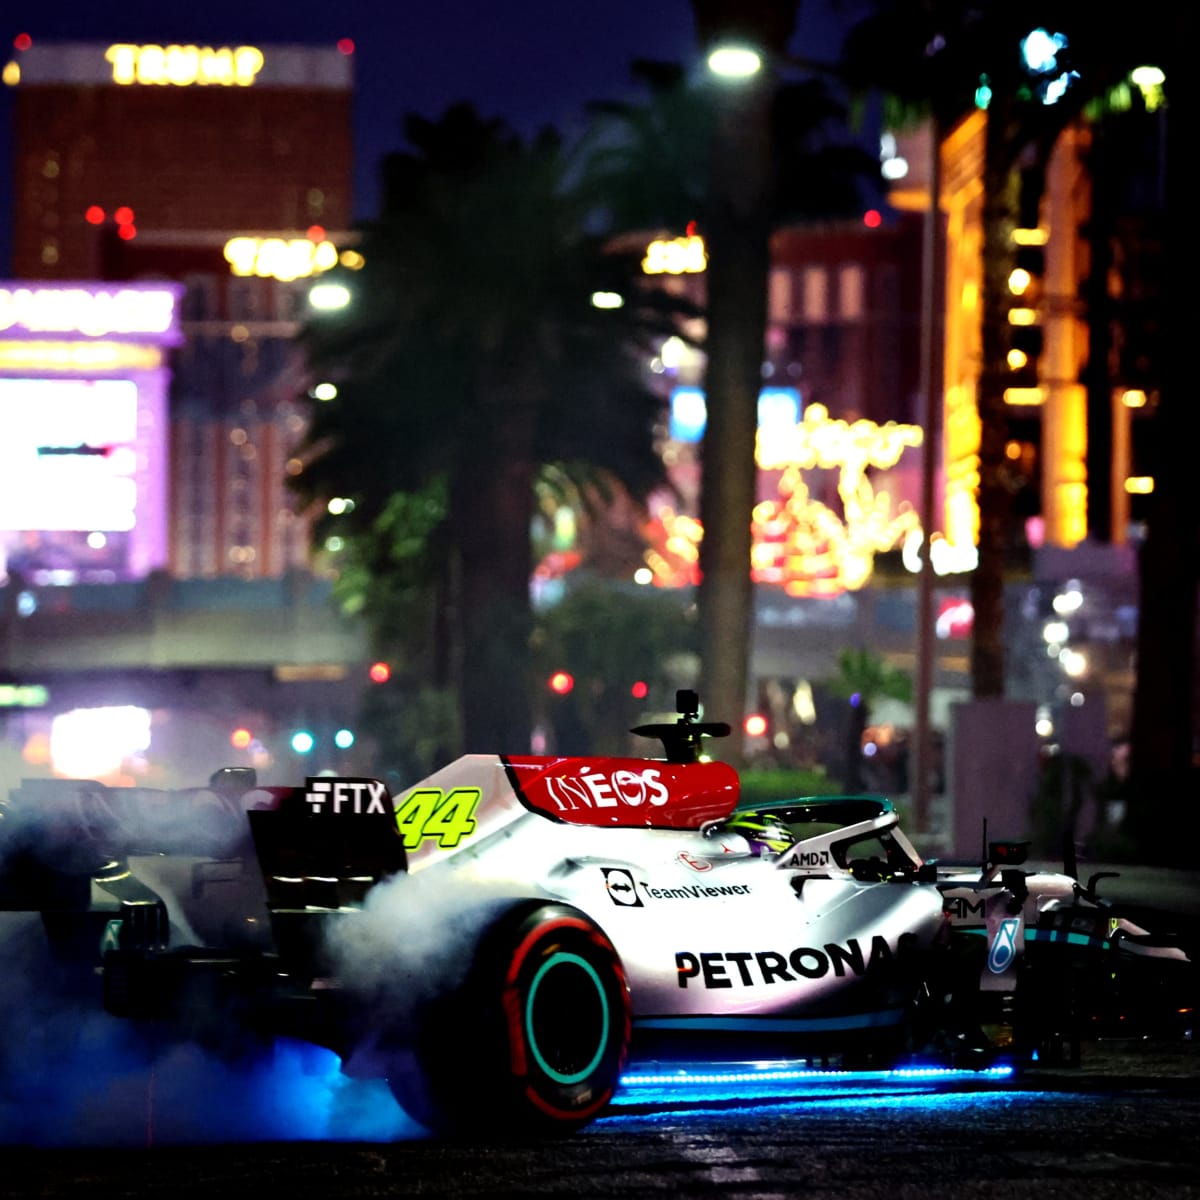 Formula 1 Is Coming to Las Vegas and We Got a Sneak Preview - InsideHook